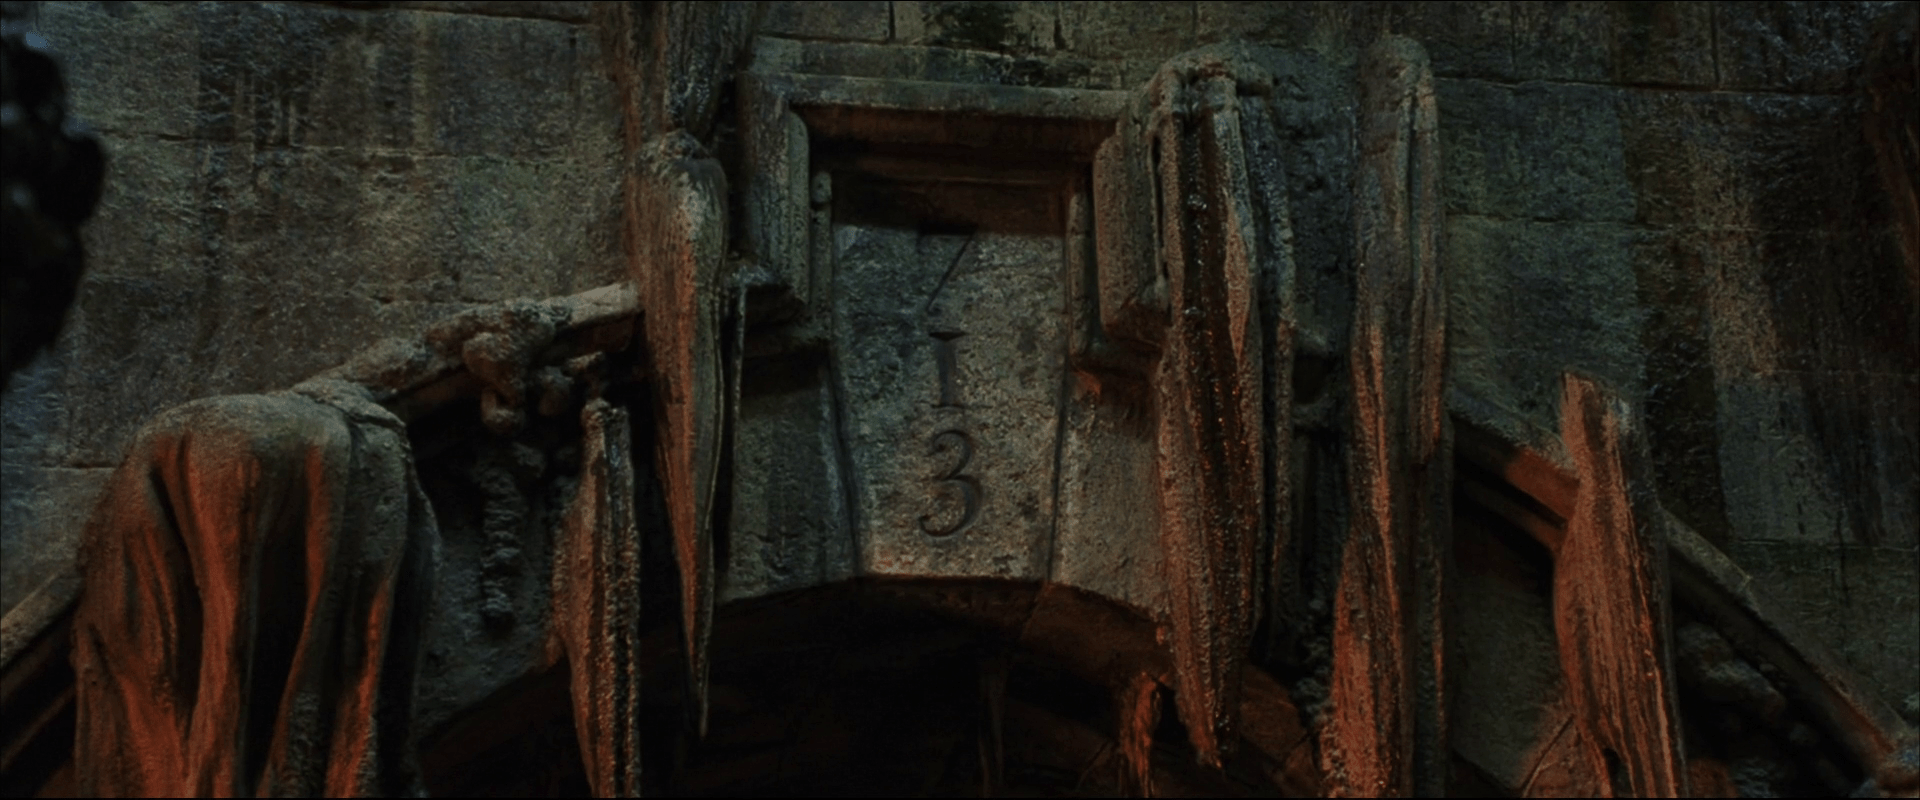 The importance of the number 7 in Harry Potter